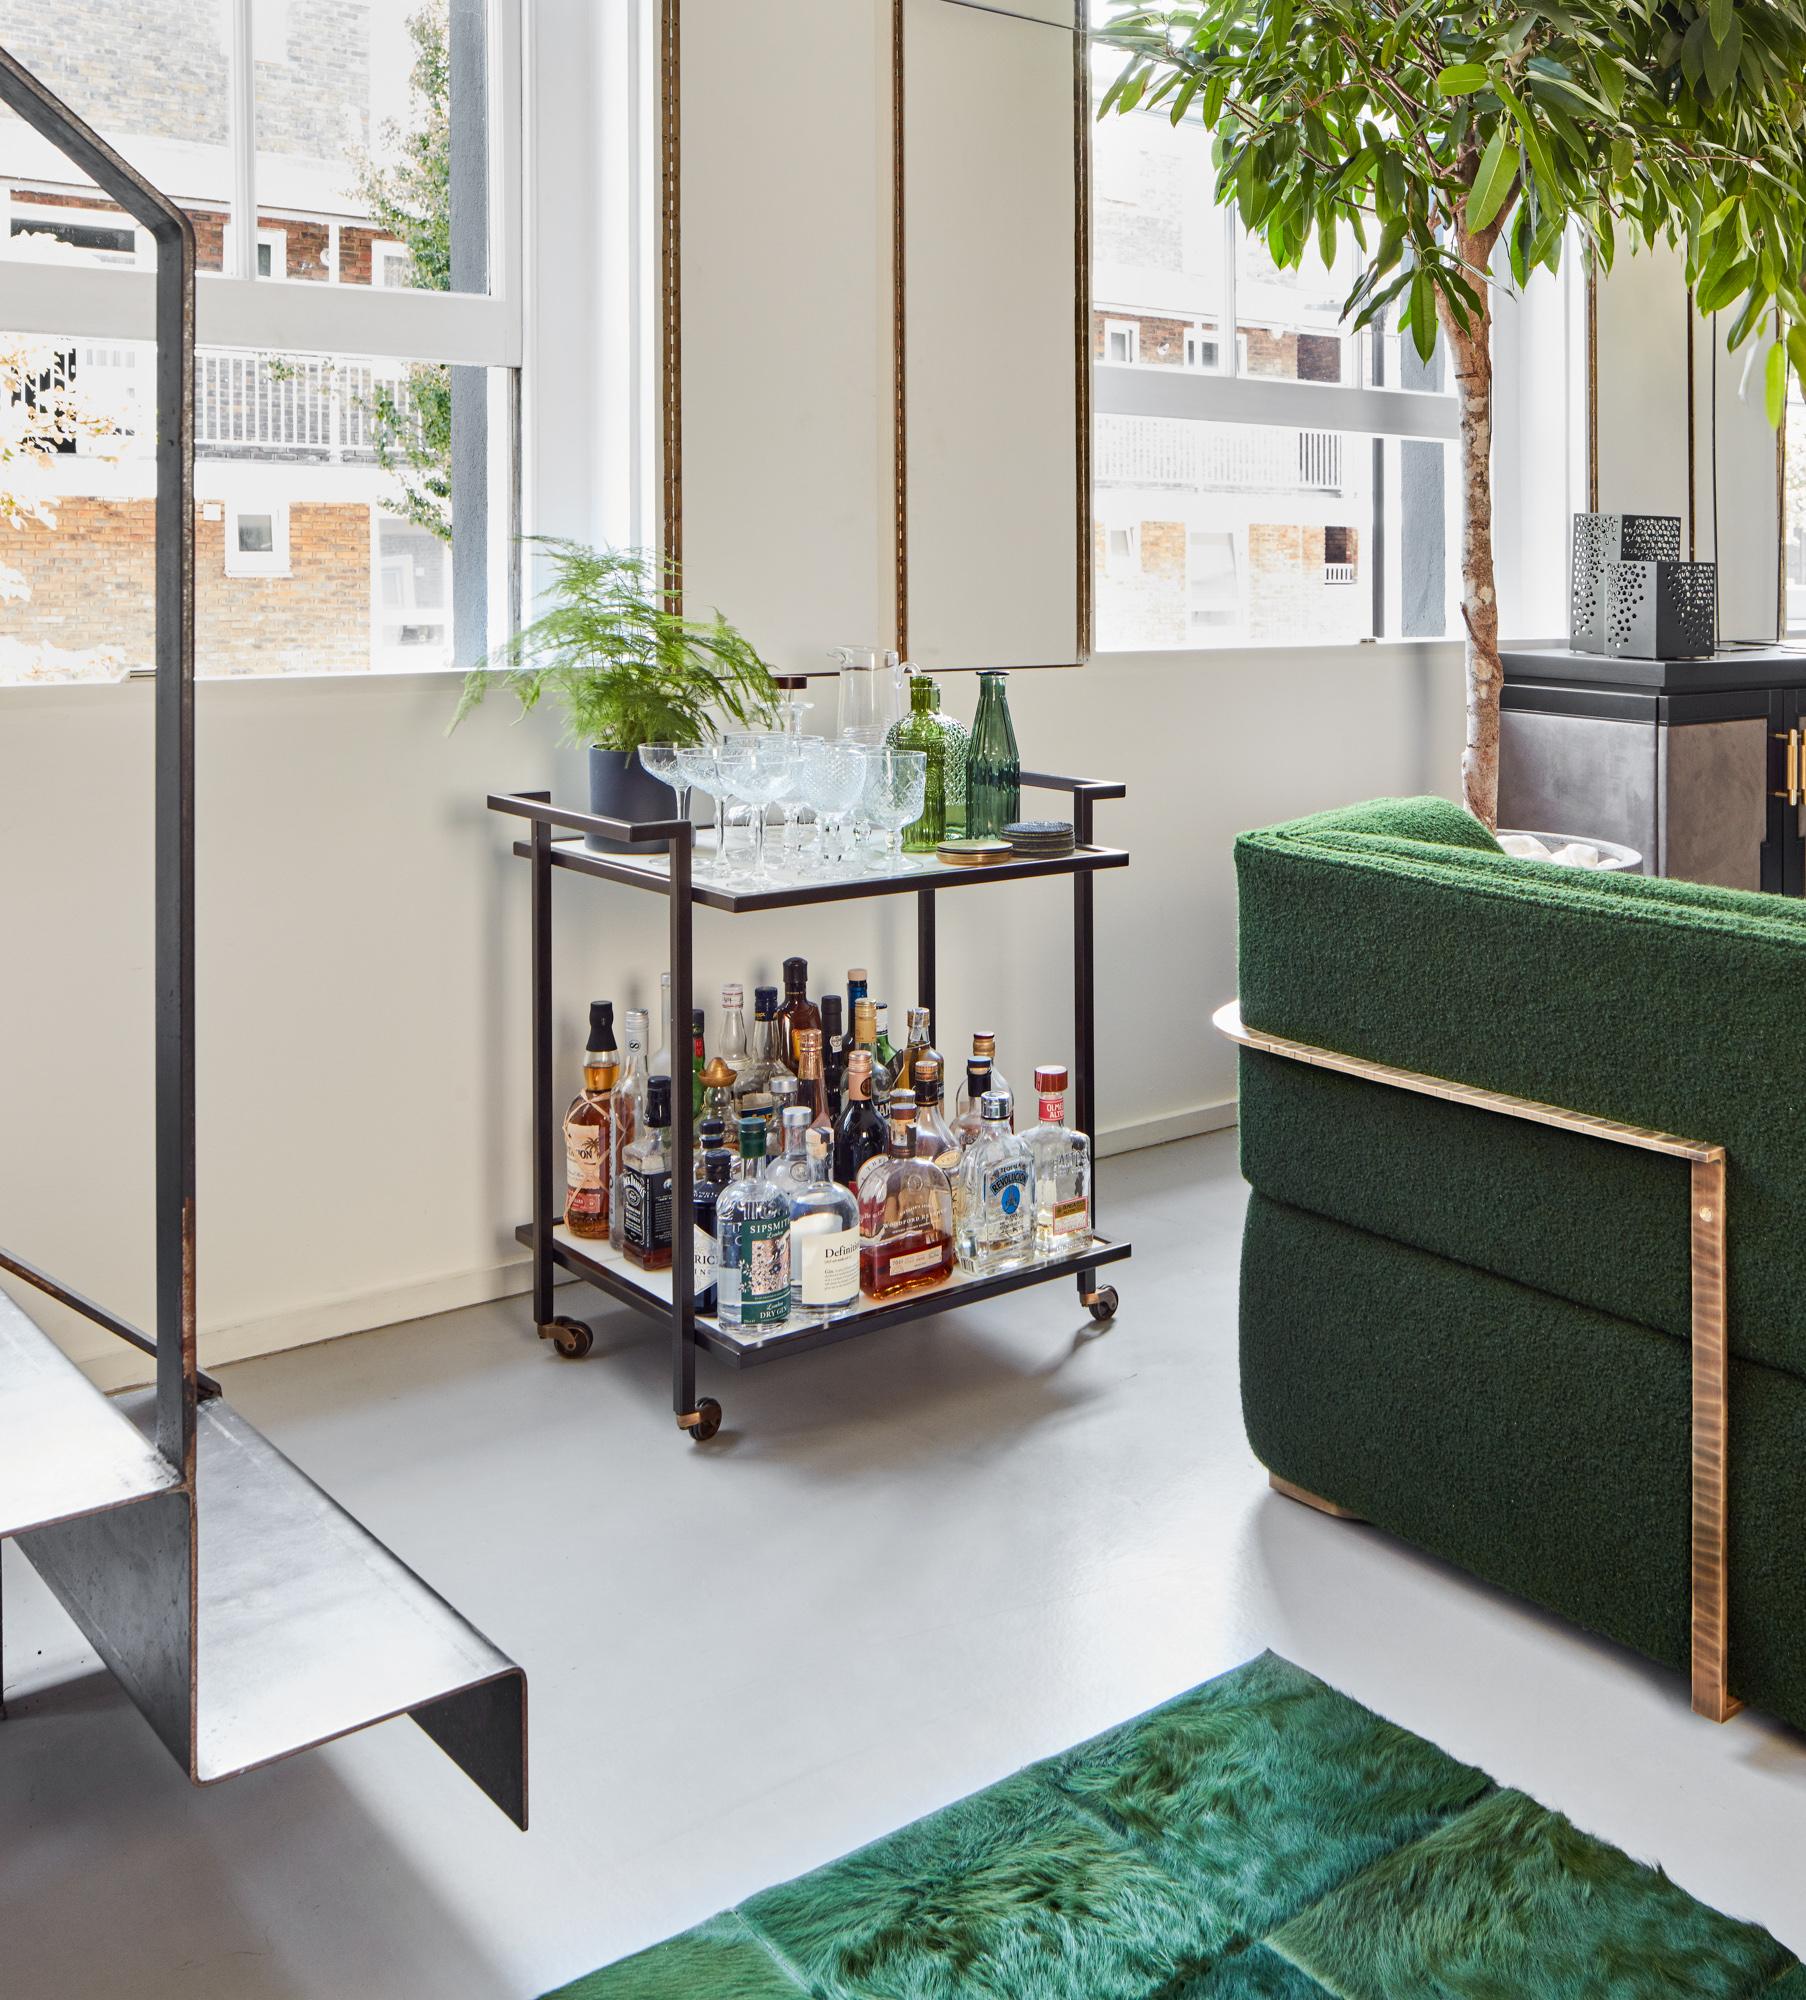 Stylishly sculptured and with perfectly designed proportions, the Bacco drinks trolley offers a glamorous, masculine aesthetic. Introducing a drinks trolley to your space is reminiscent of days gone by when the pleasure of having a cocktail was as